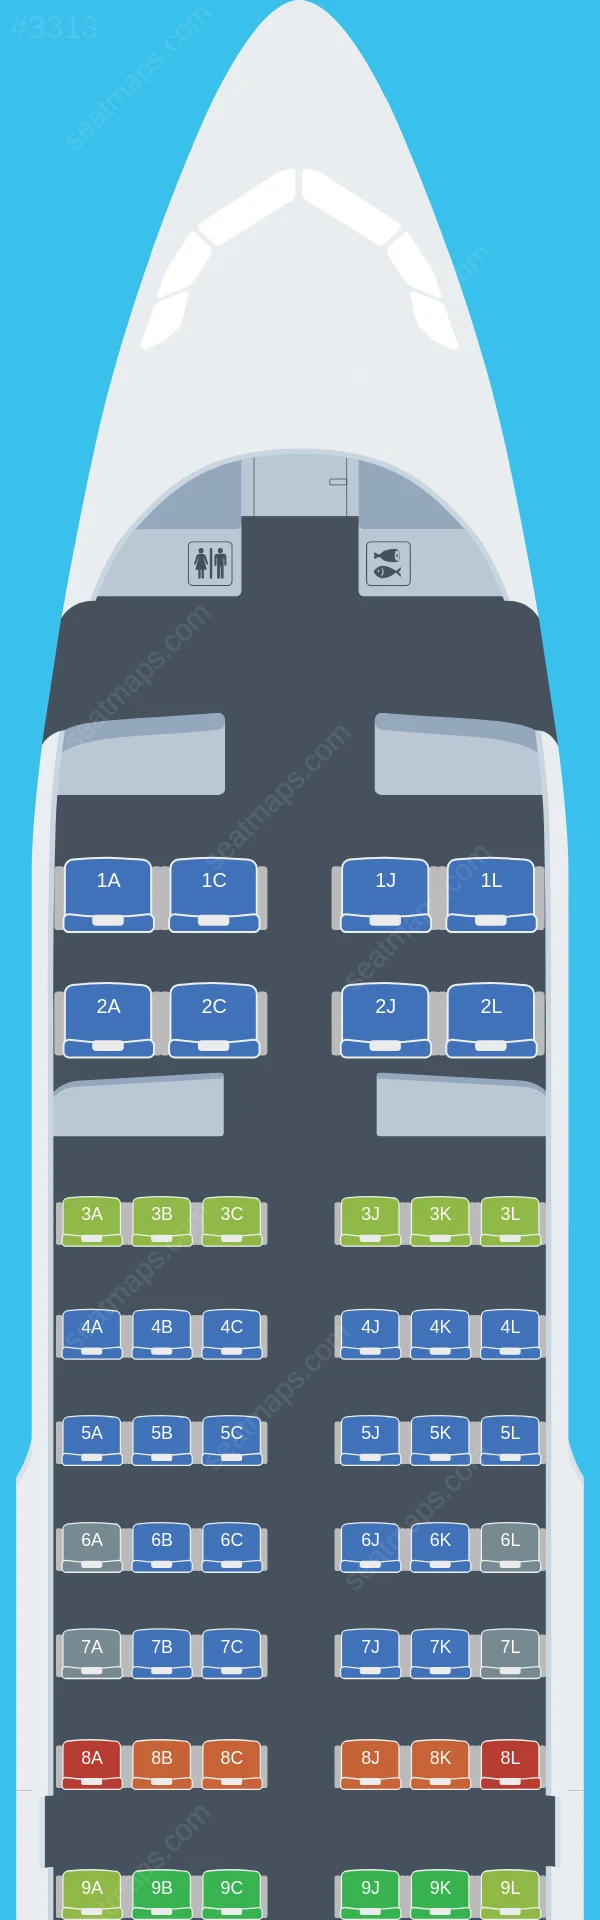 Shenzhen Airlines Airbus A319-100 seatmap preview